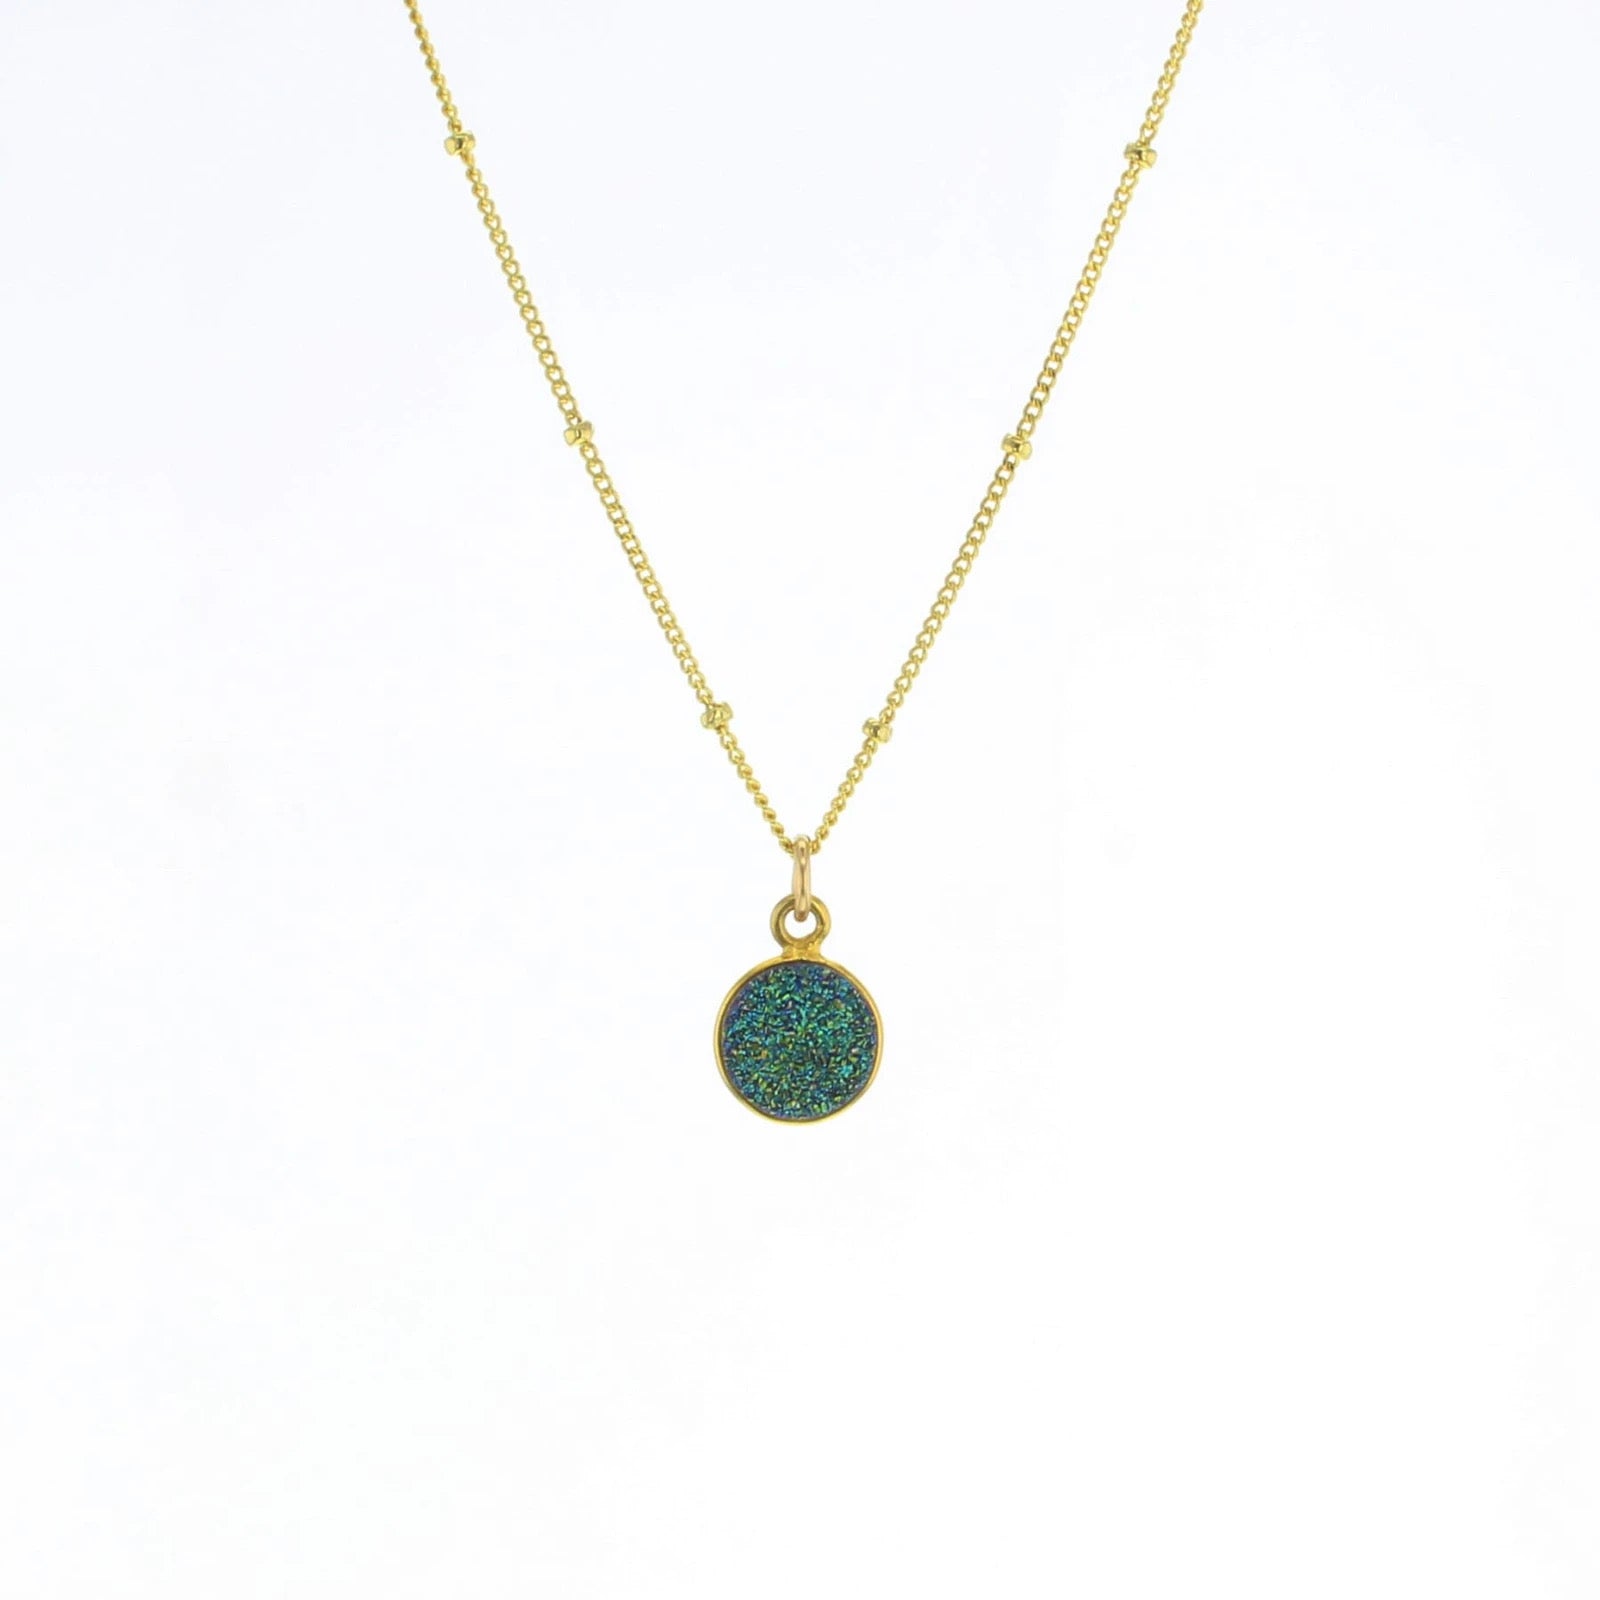 Gold Luster Necklace